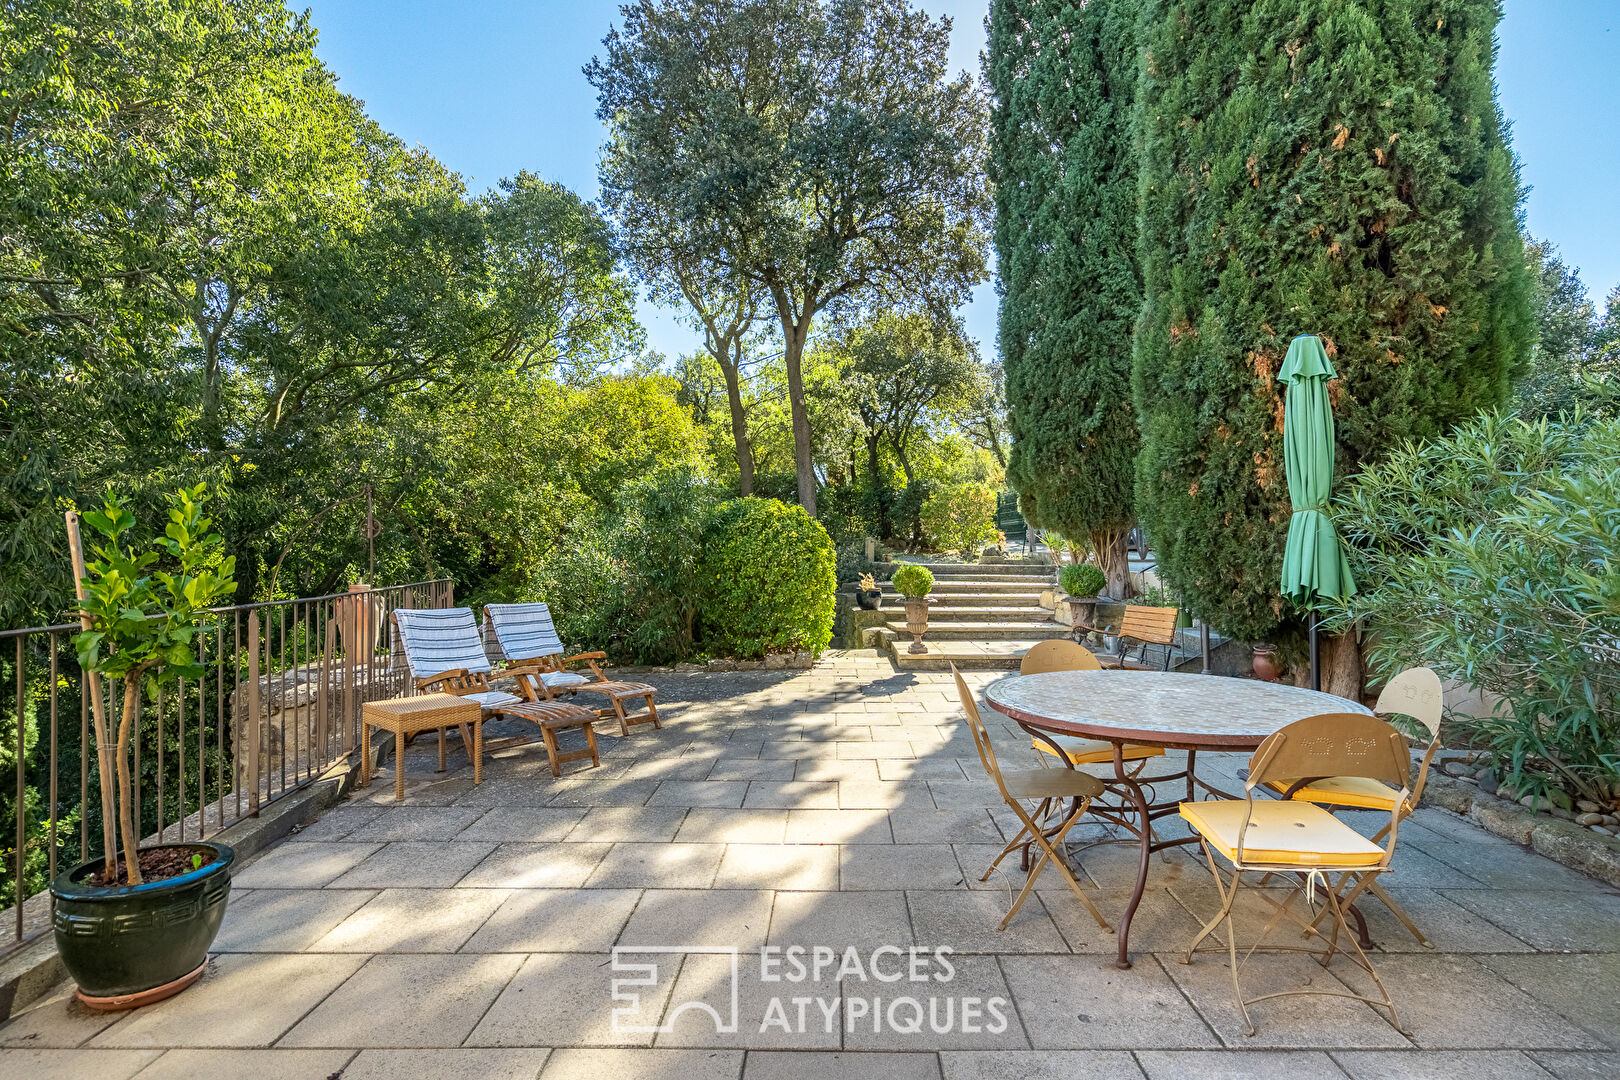 19th century Provencal farmhouse with garden and swimming pool